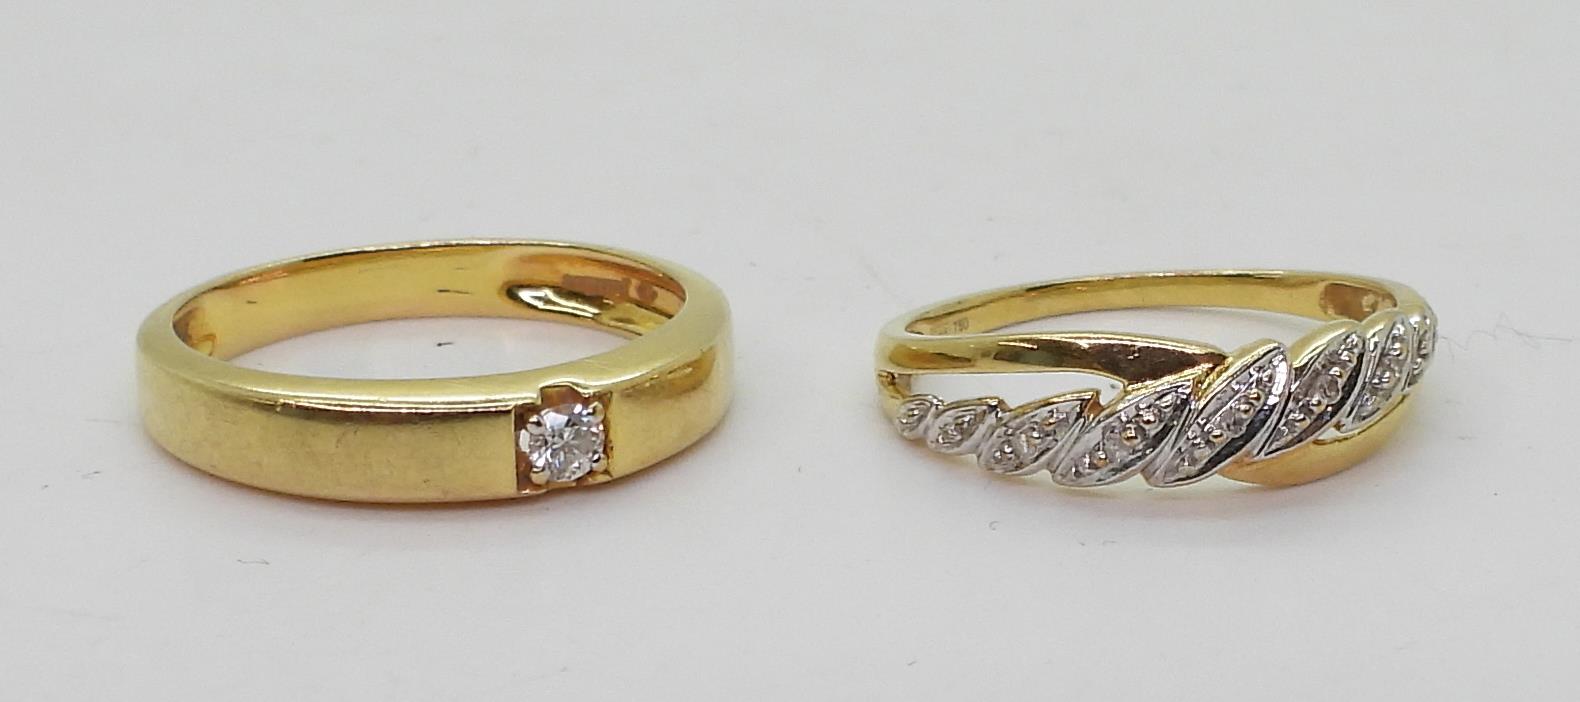 An 18ct gold diamond set band ring, set with a 0.08ct diamond, size O, and an 18ct gold leaf pattern - Image 5 of 6